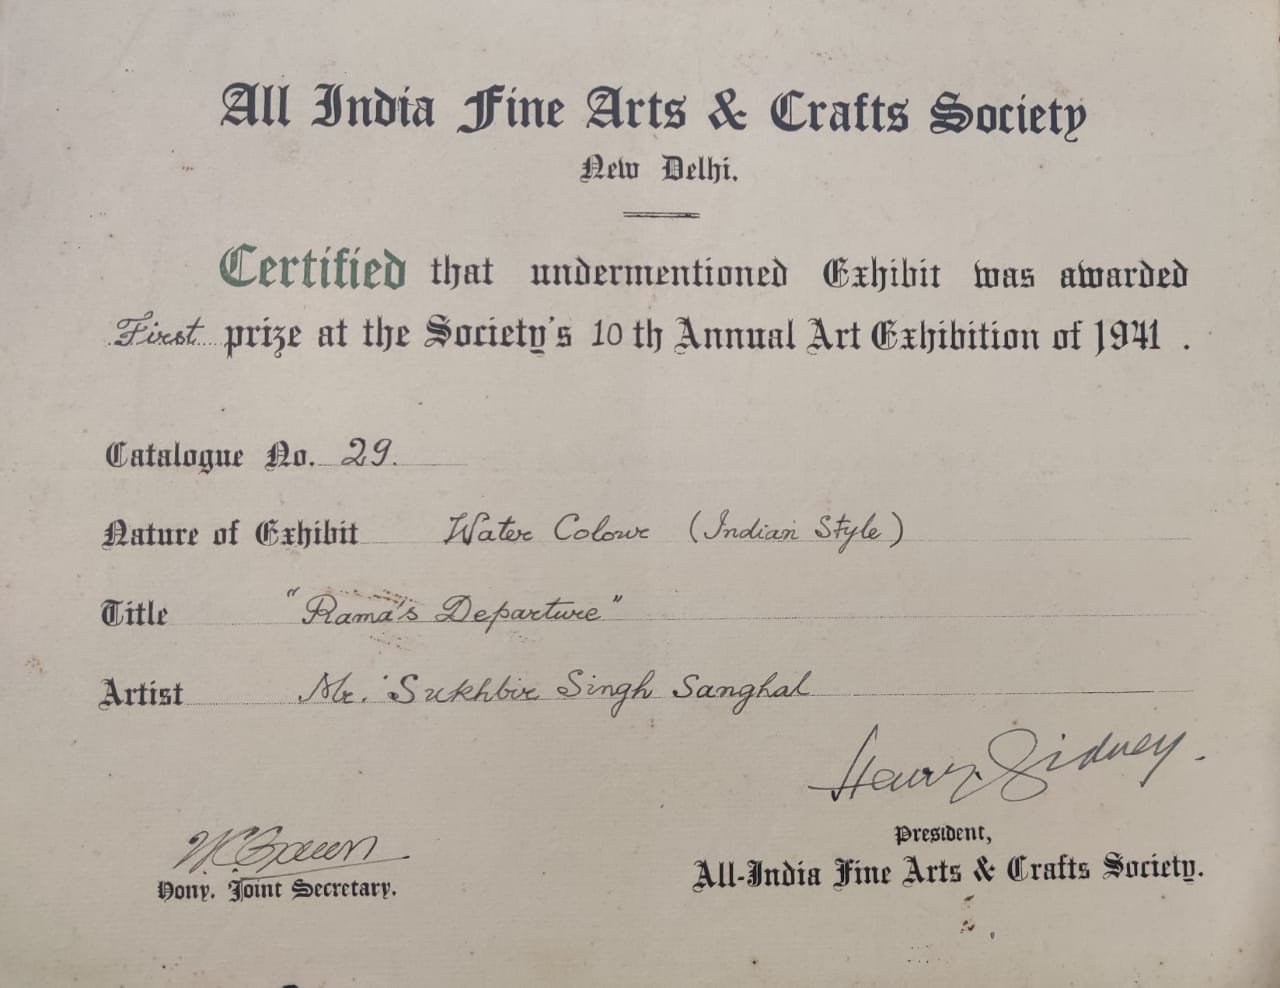 Prof. Sukhvir Sanghal was awarded first prize by all india arts and crafts society new delhi in 1941